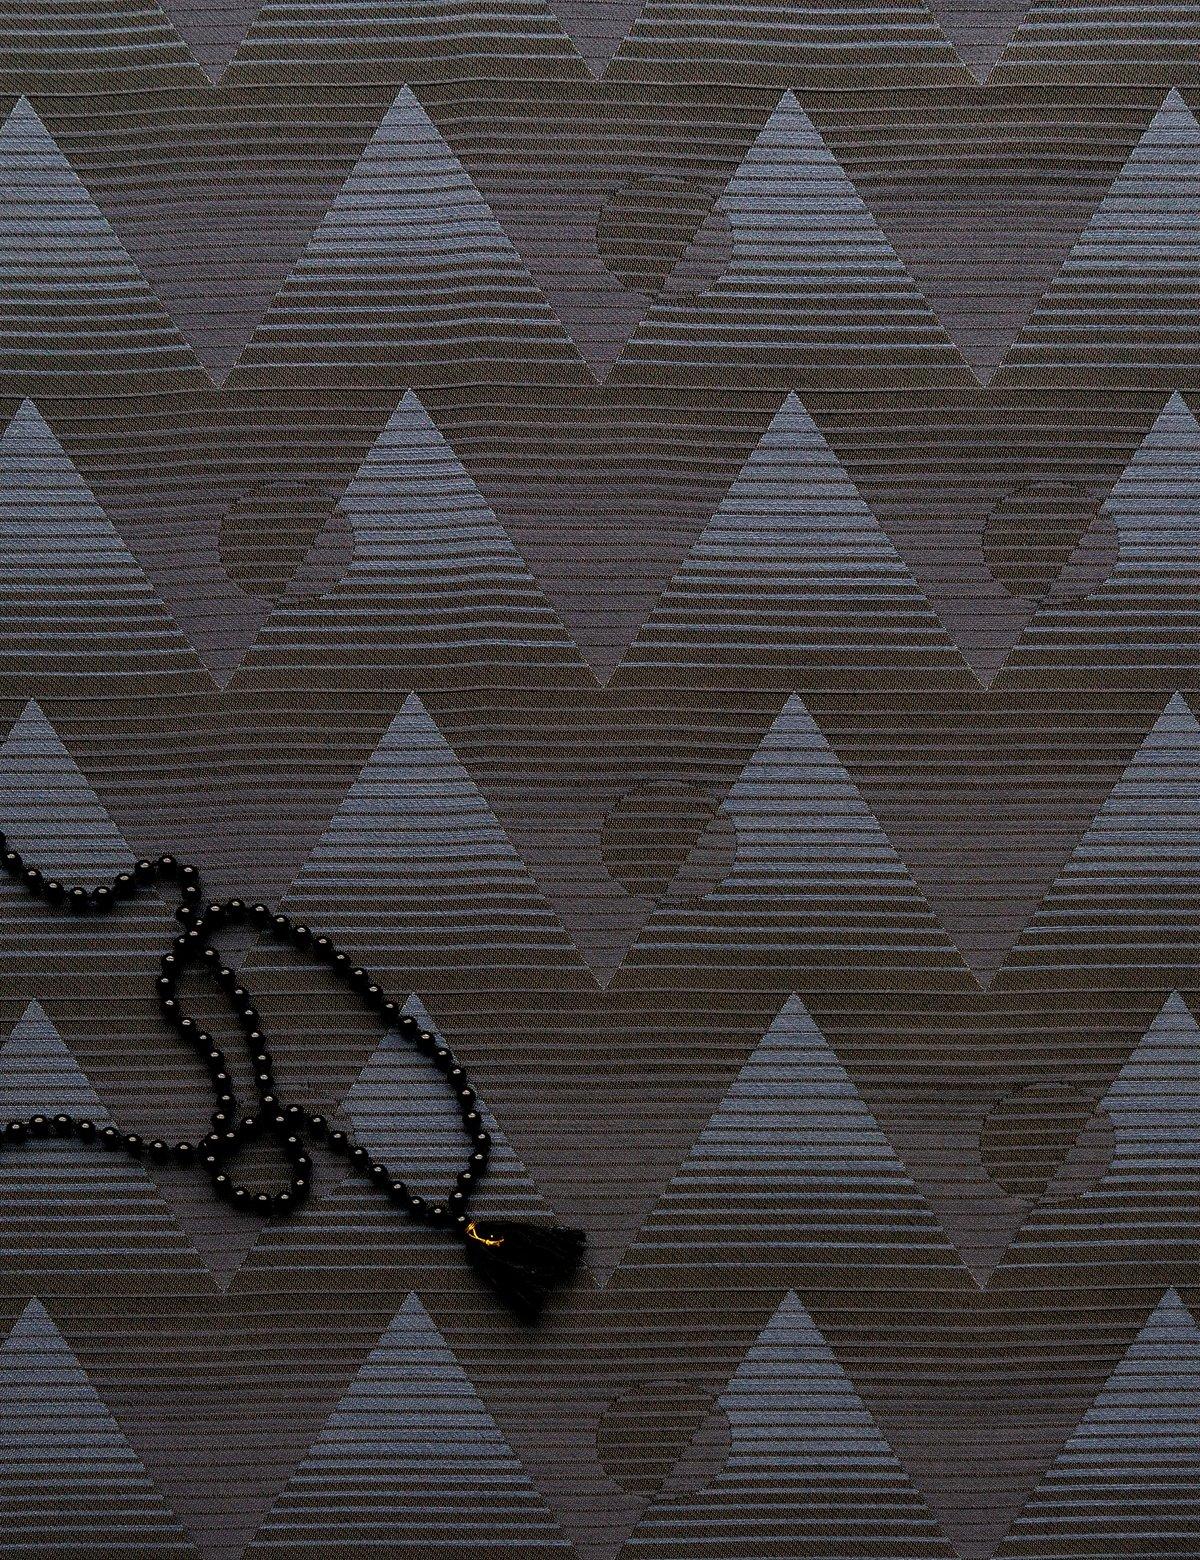 A subtly optical pattern manifesting the ancient sun’s shadow and its balance with the earth. This design features pyramid and sun as they represent the illusive quality of time.

This product is a Jacquard woven, commercial grade fabric. 

Samples